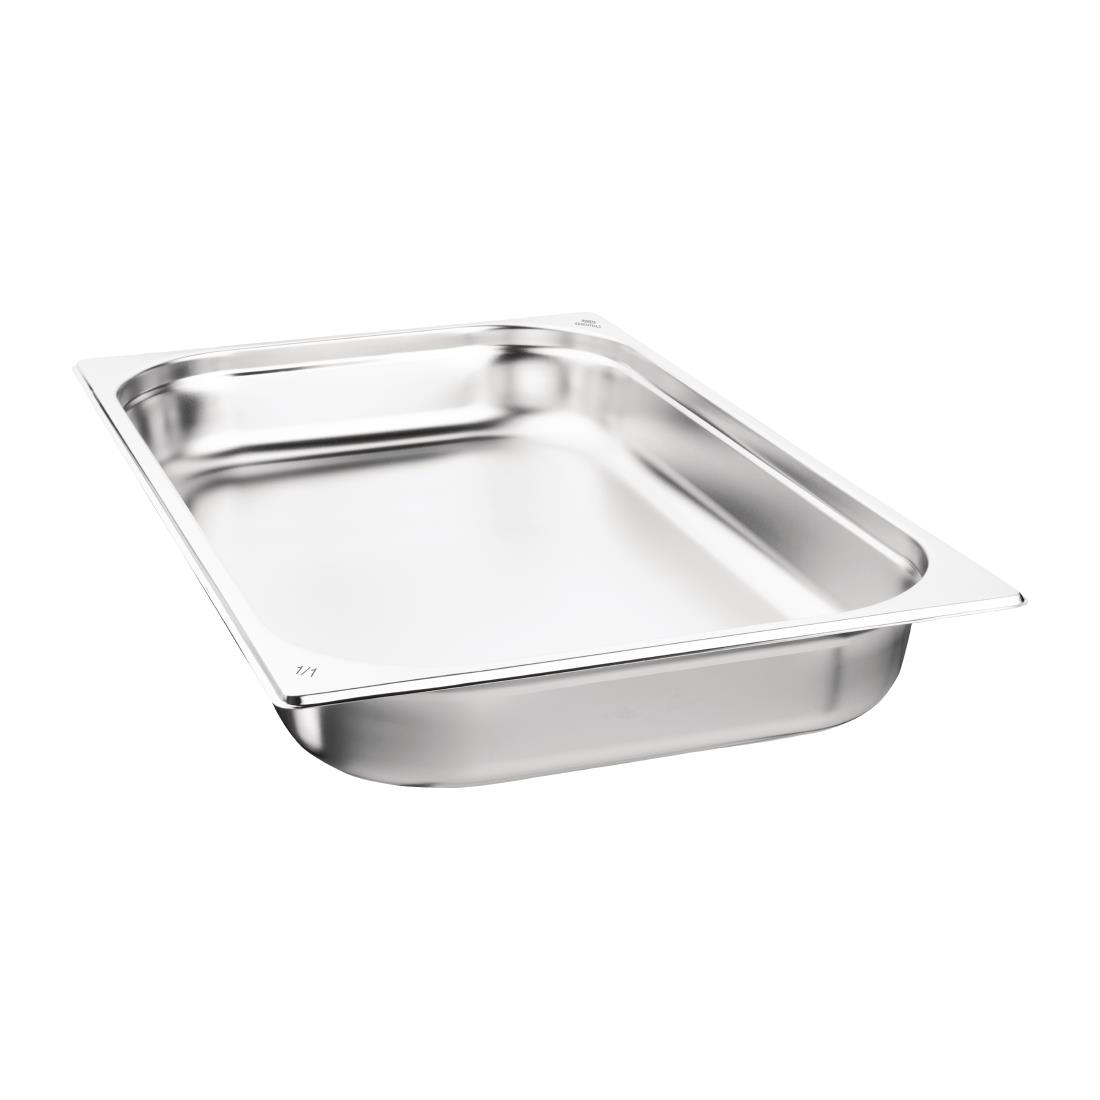 Nisbets Essentials Stainless Steel Gastronorm Tray 65mm Pack 3 (DB881)